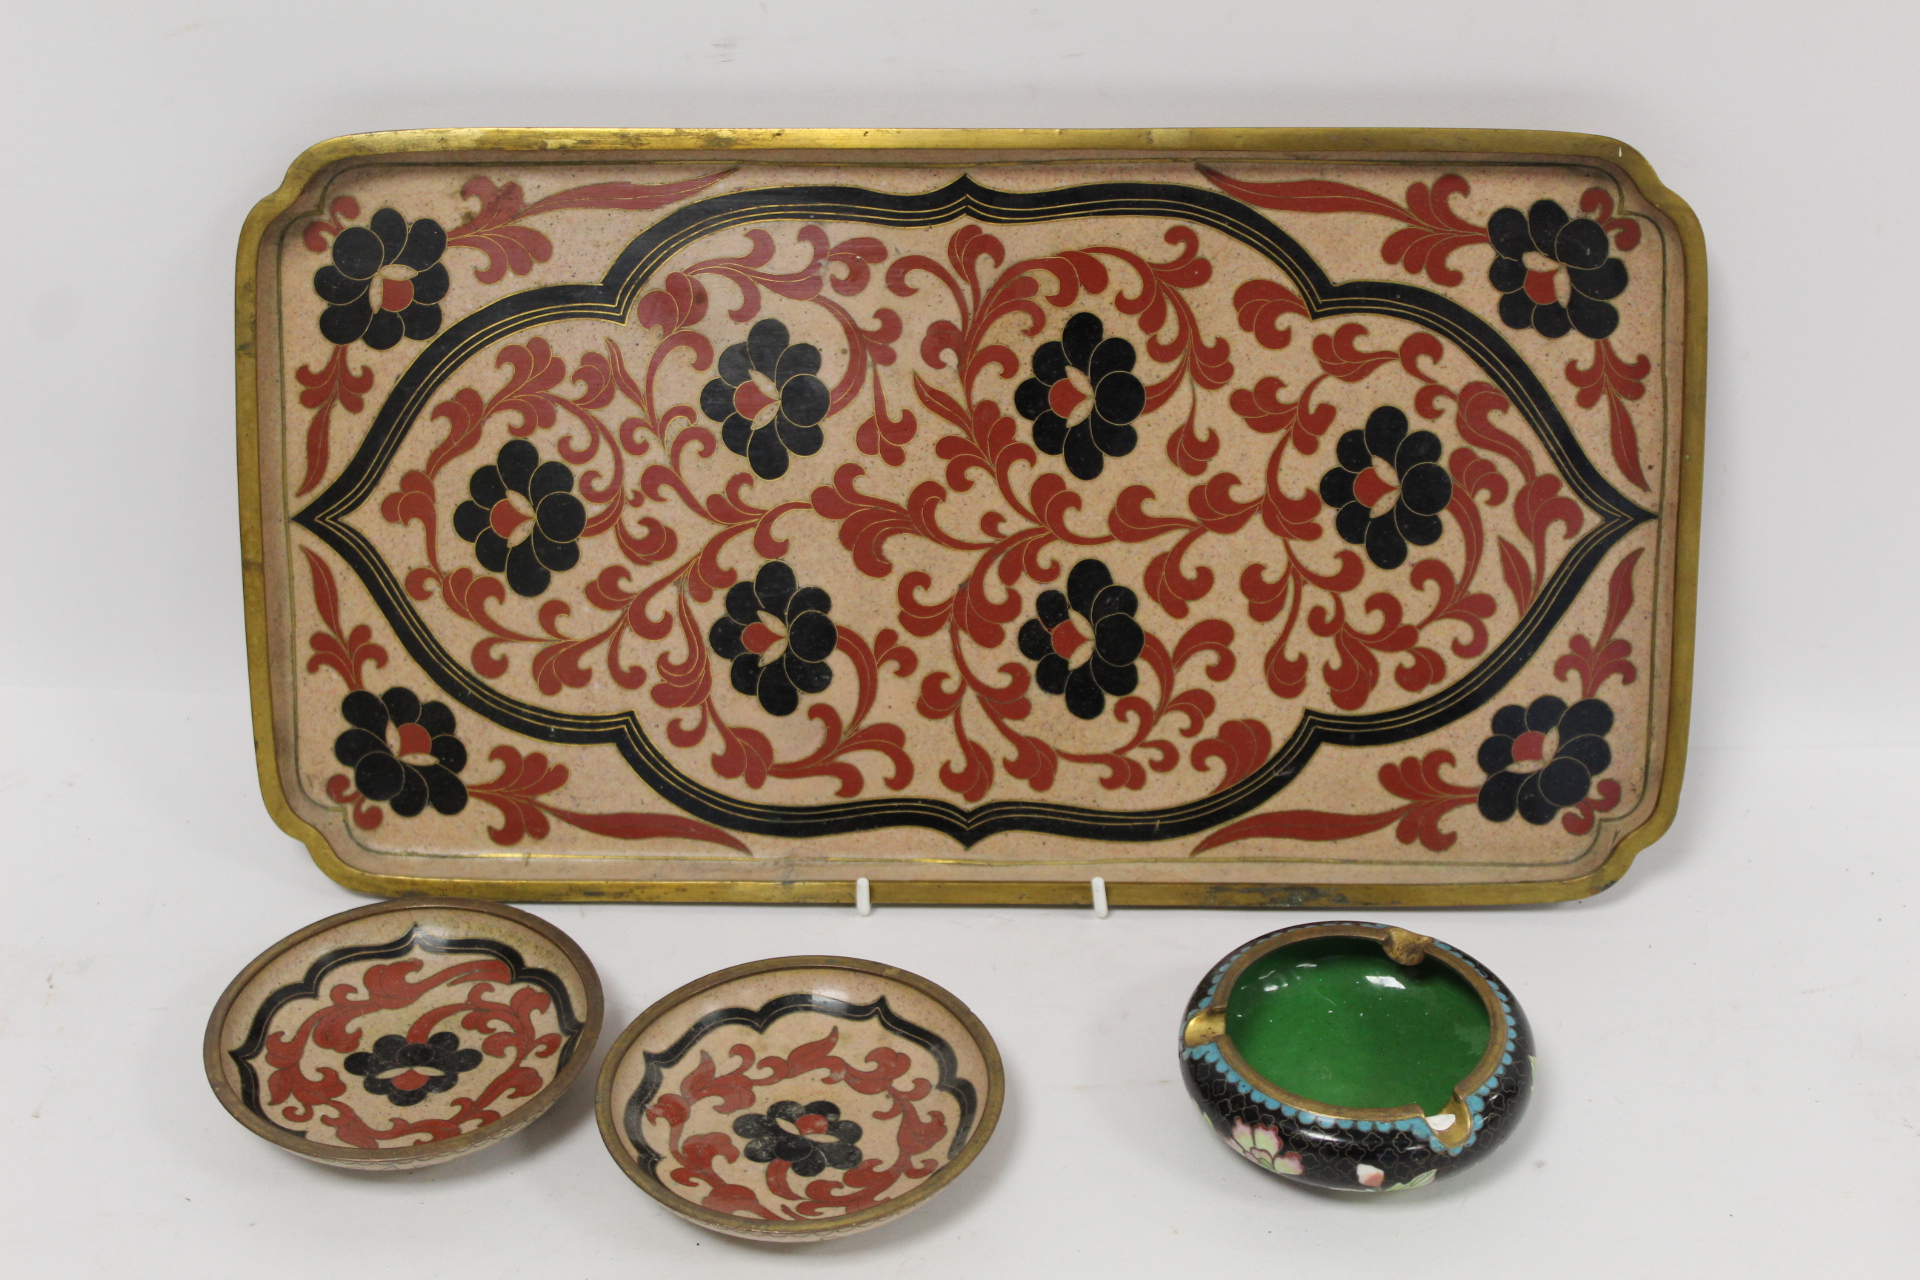 Late 19th/early 20th century Chinese cloisonne tray of rectangular form, with black and red floral